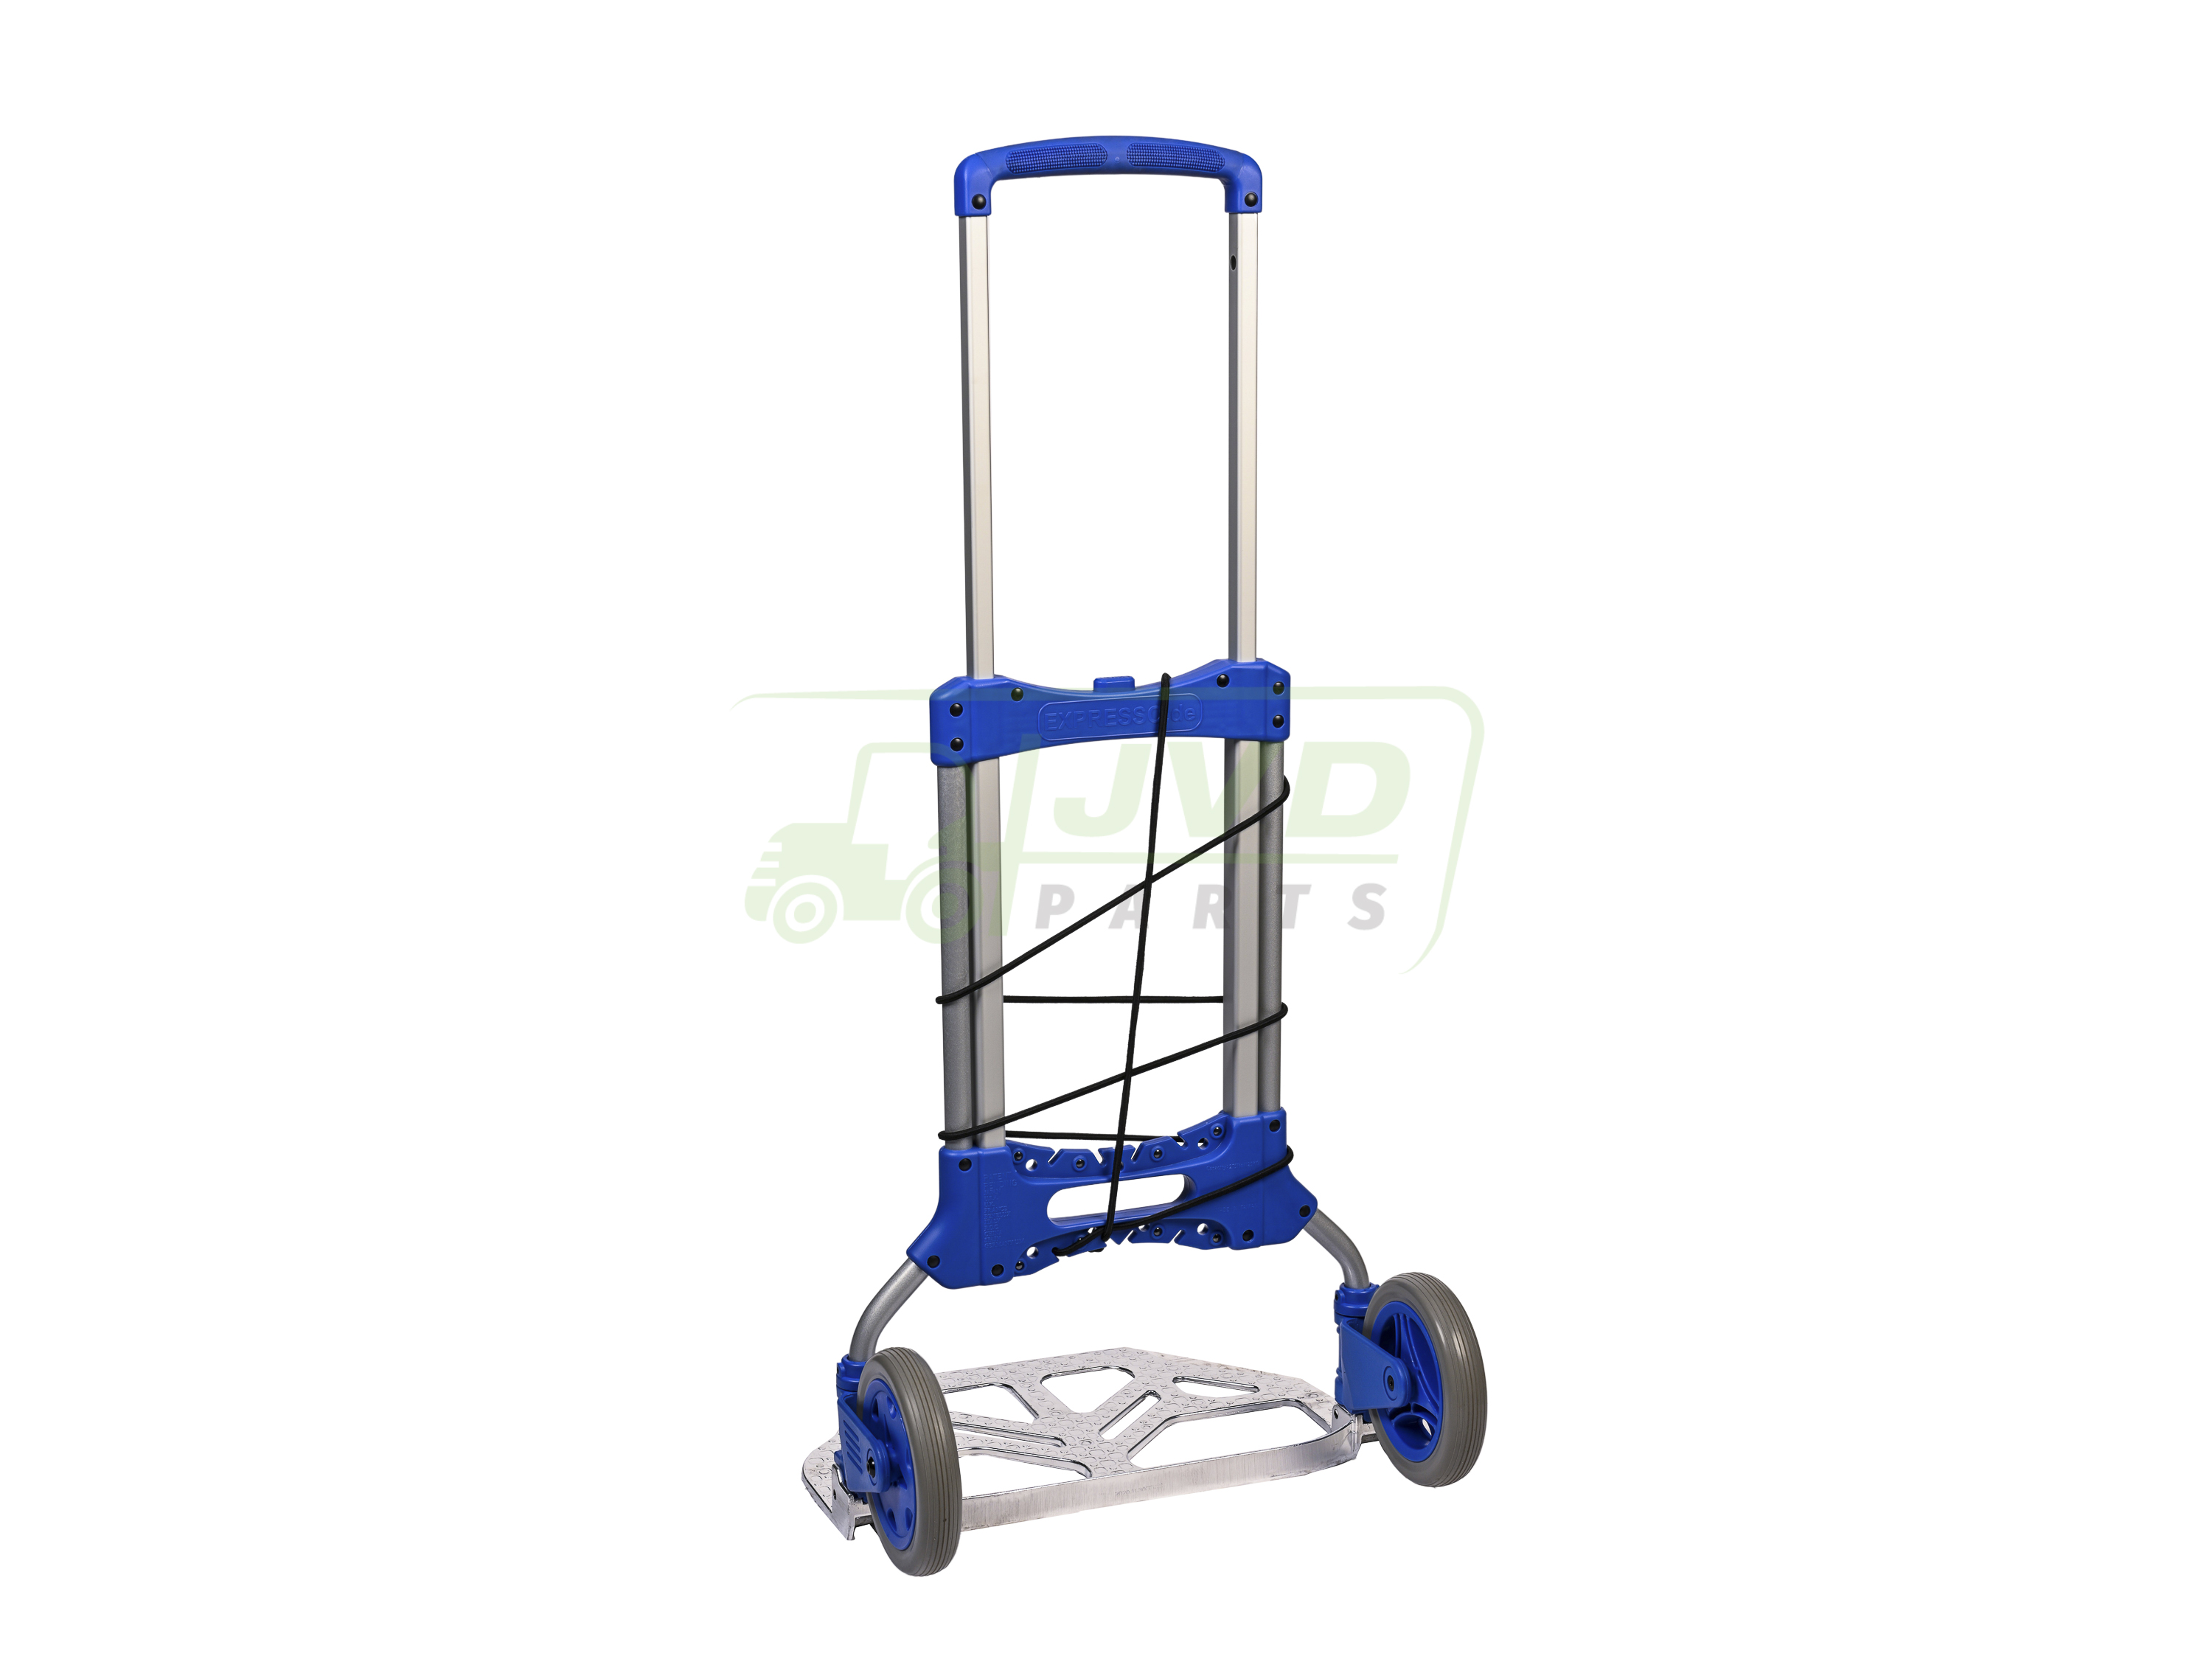 Expresso Aluminium Handtrolley, Height 1090mm - Foldable Plate